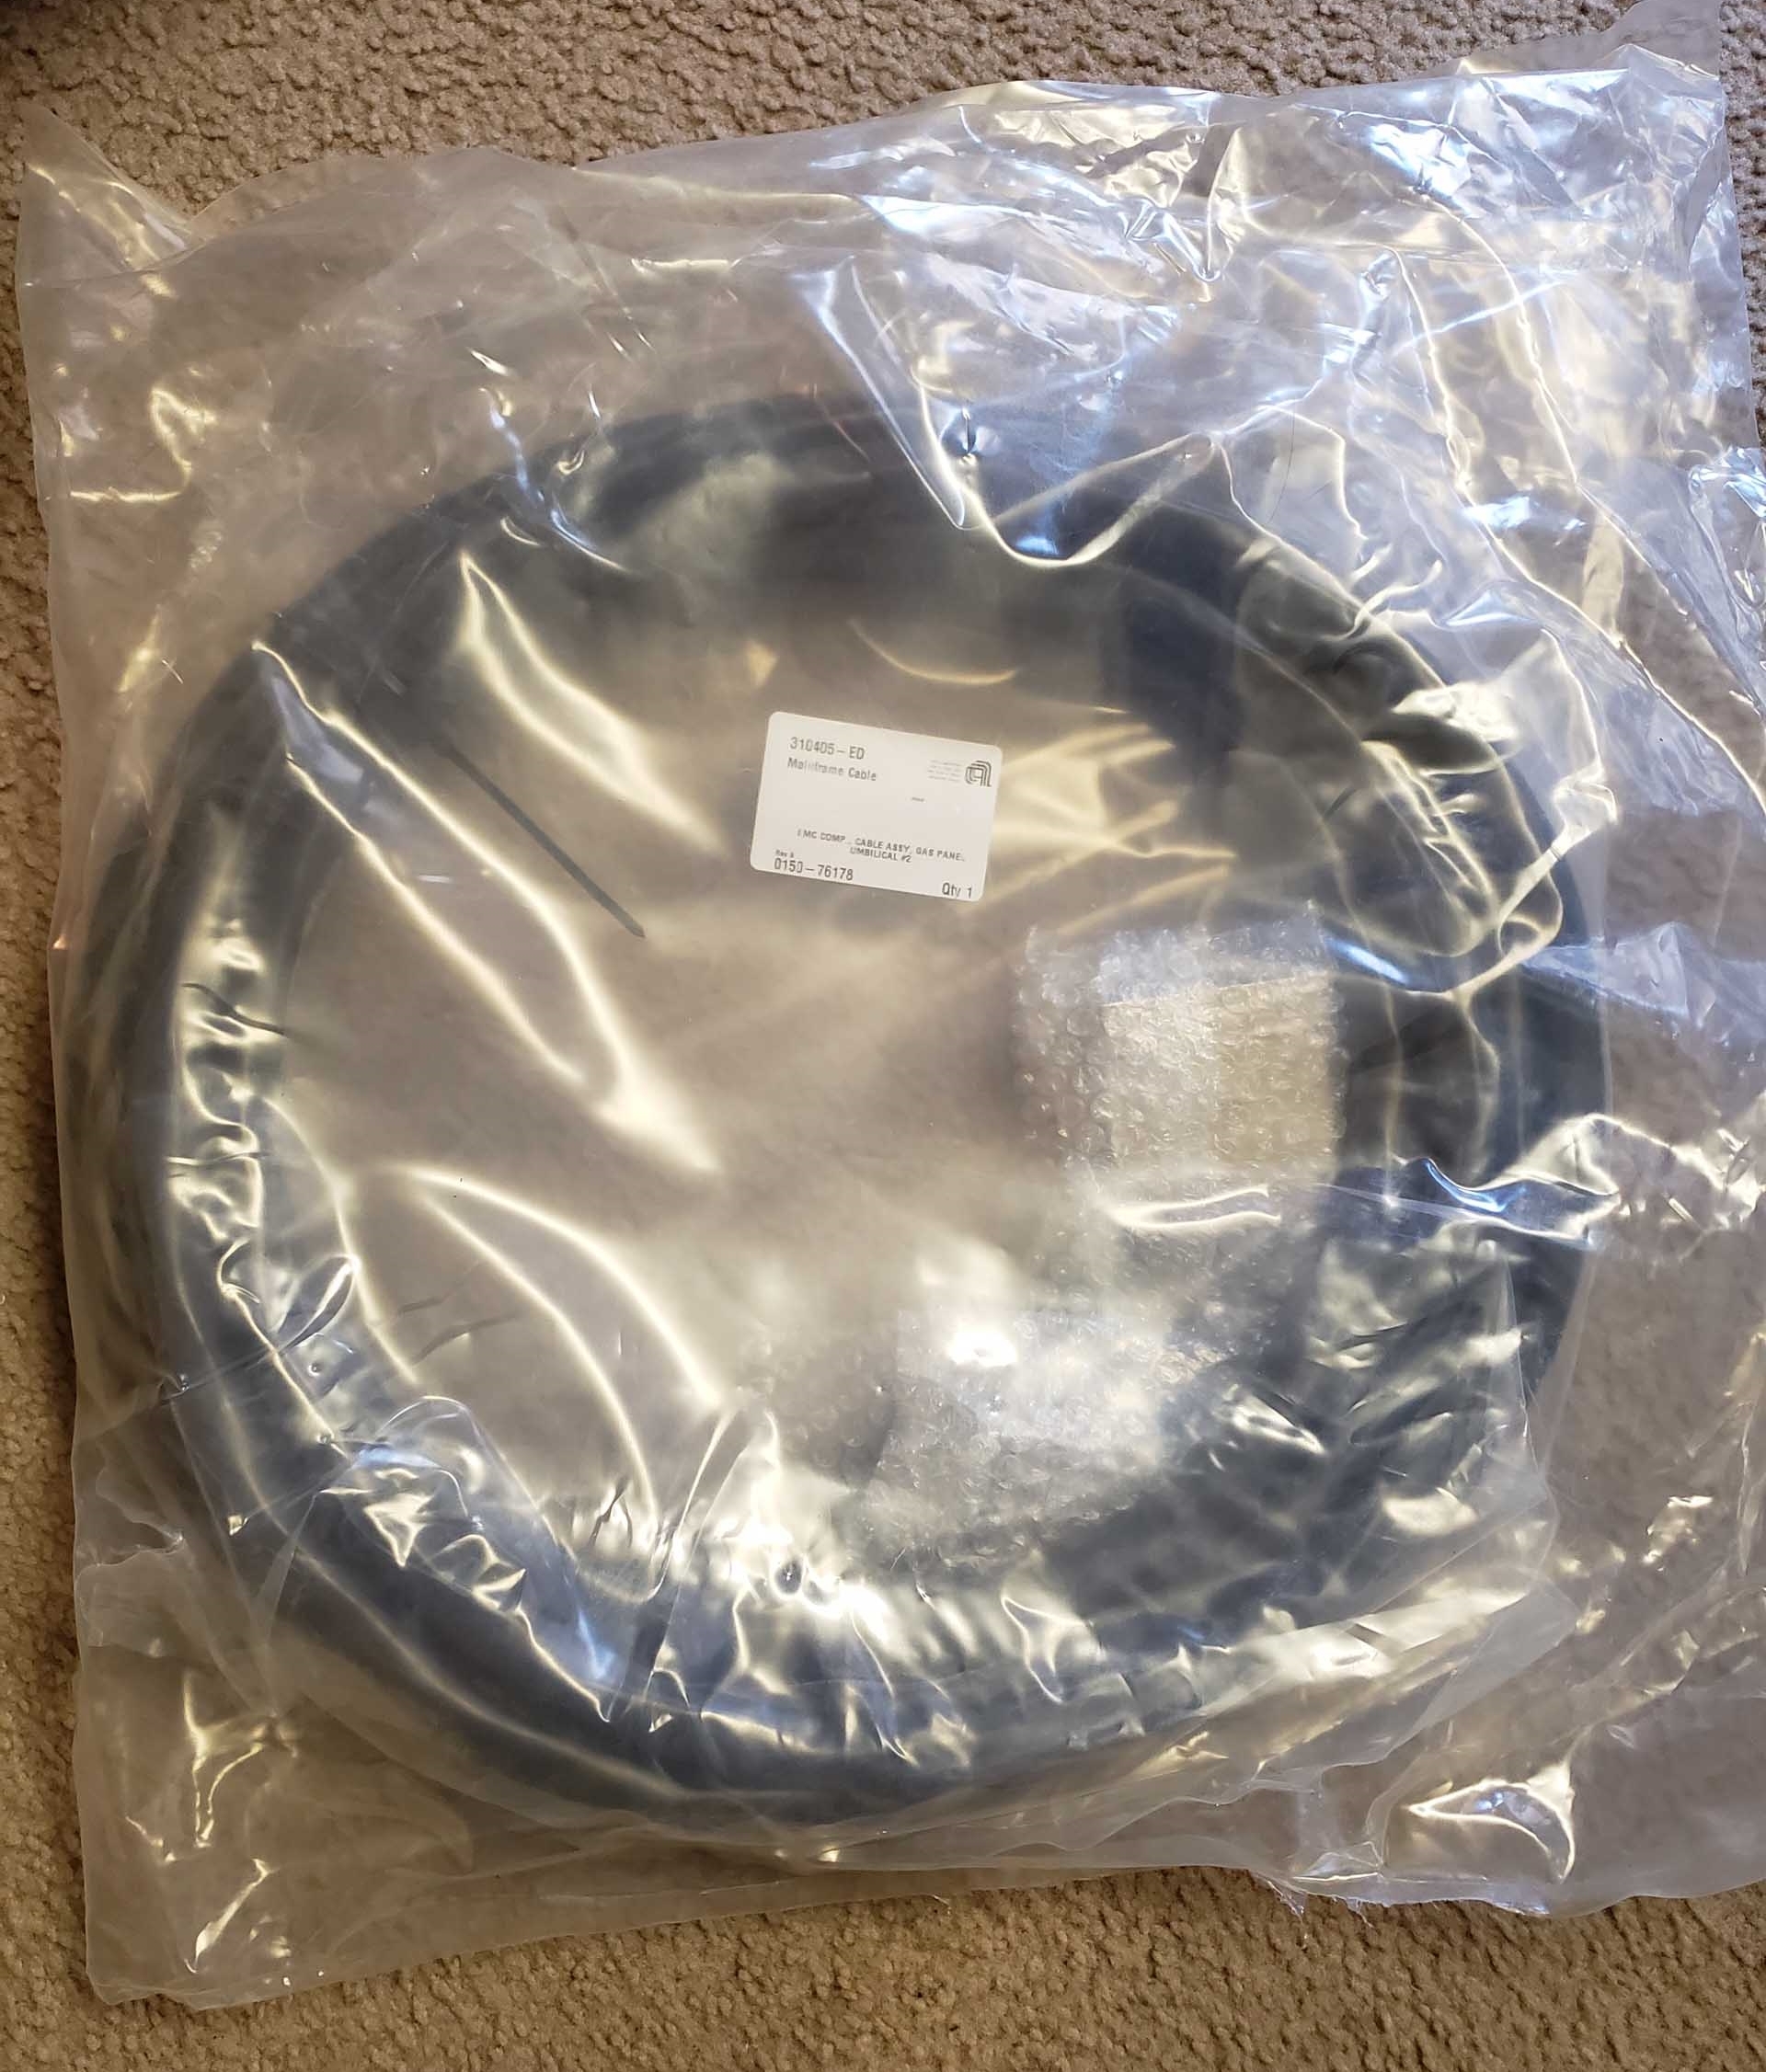 AMAT / APPLIED MATERIALS / AKT Lot of spare parts Parts used for sale ...